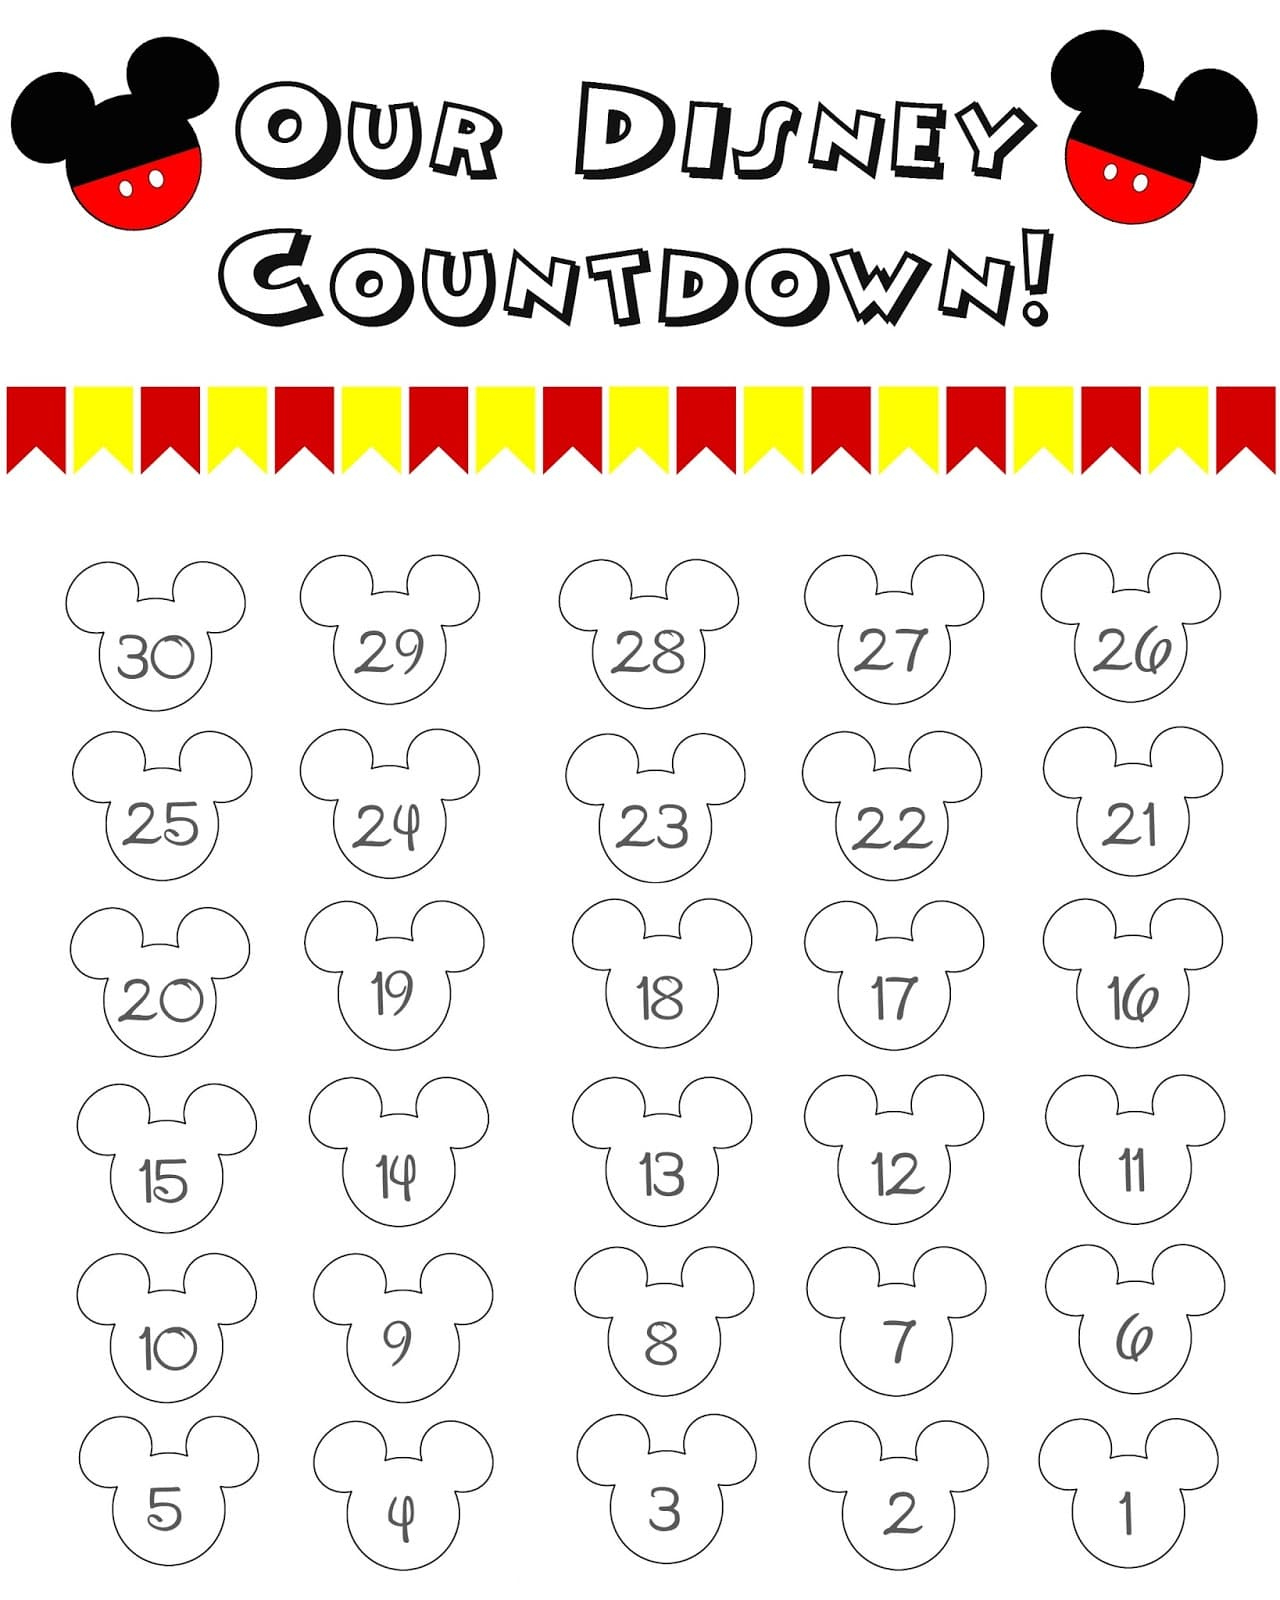 Great Ways To Countdown The Days To Your Disney World 100 Day Countdown Printable